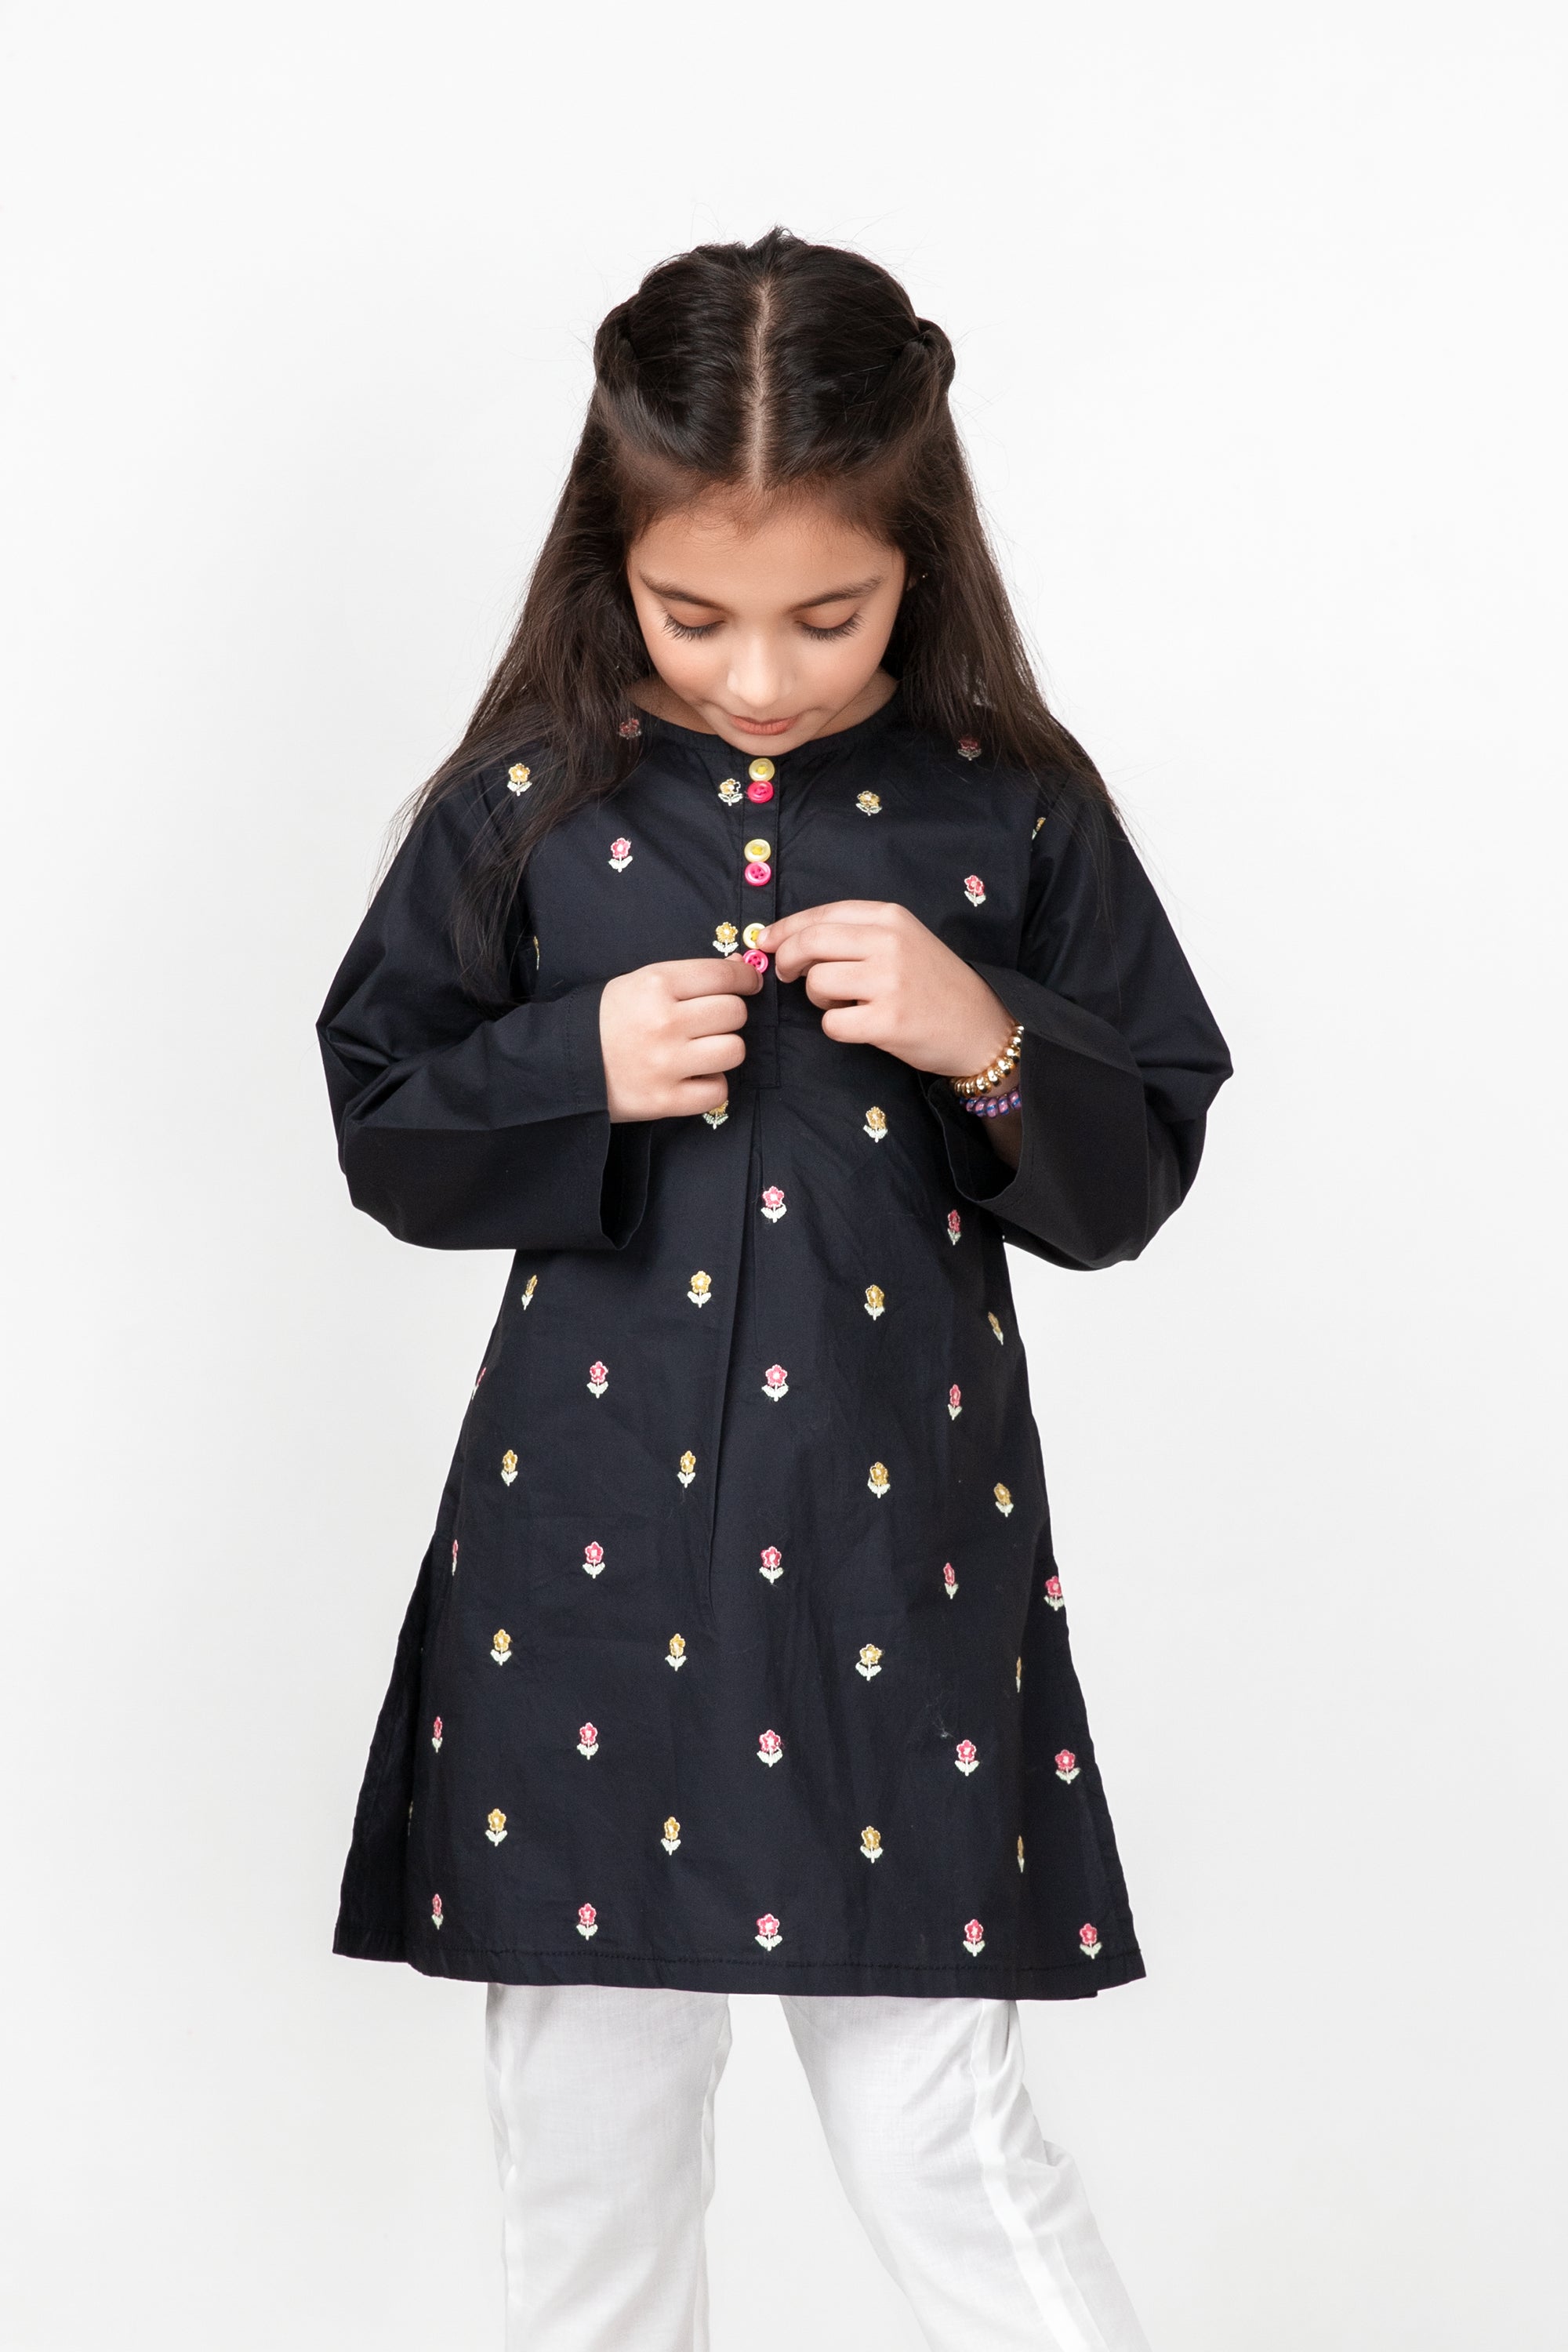 Girls Black Embroidered Top